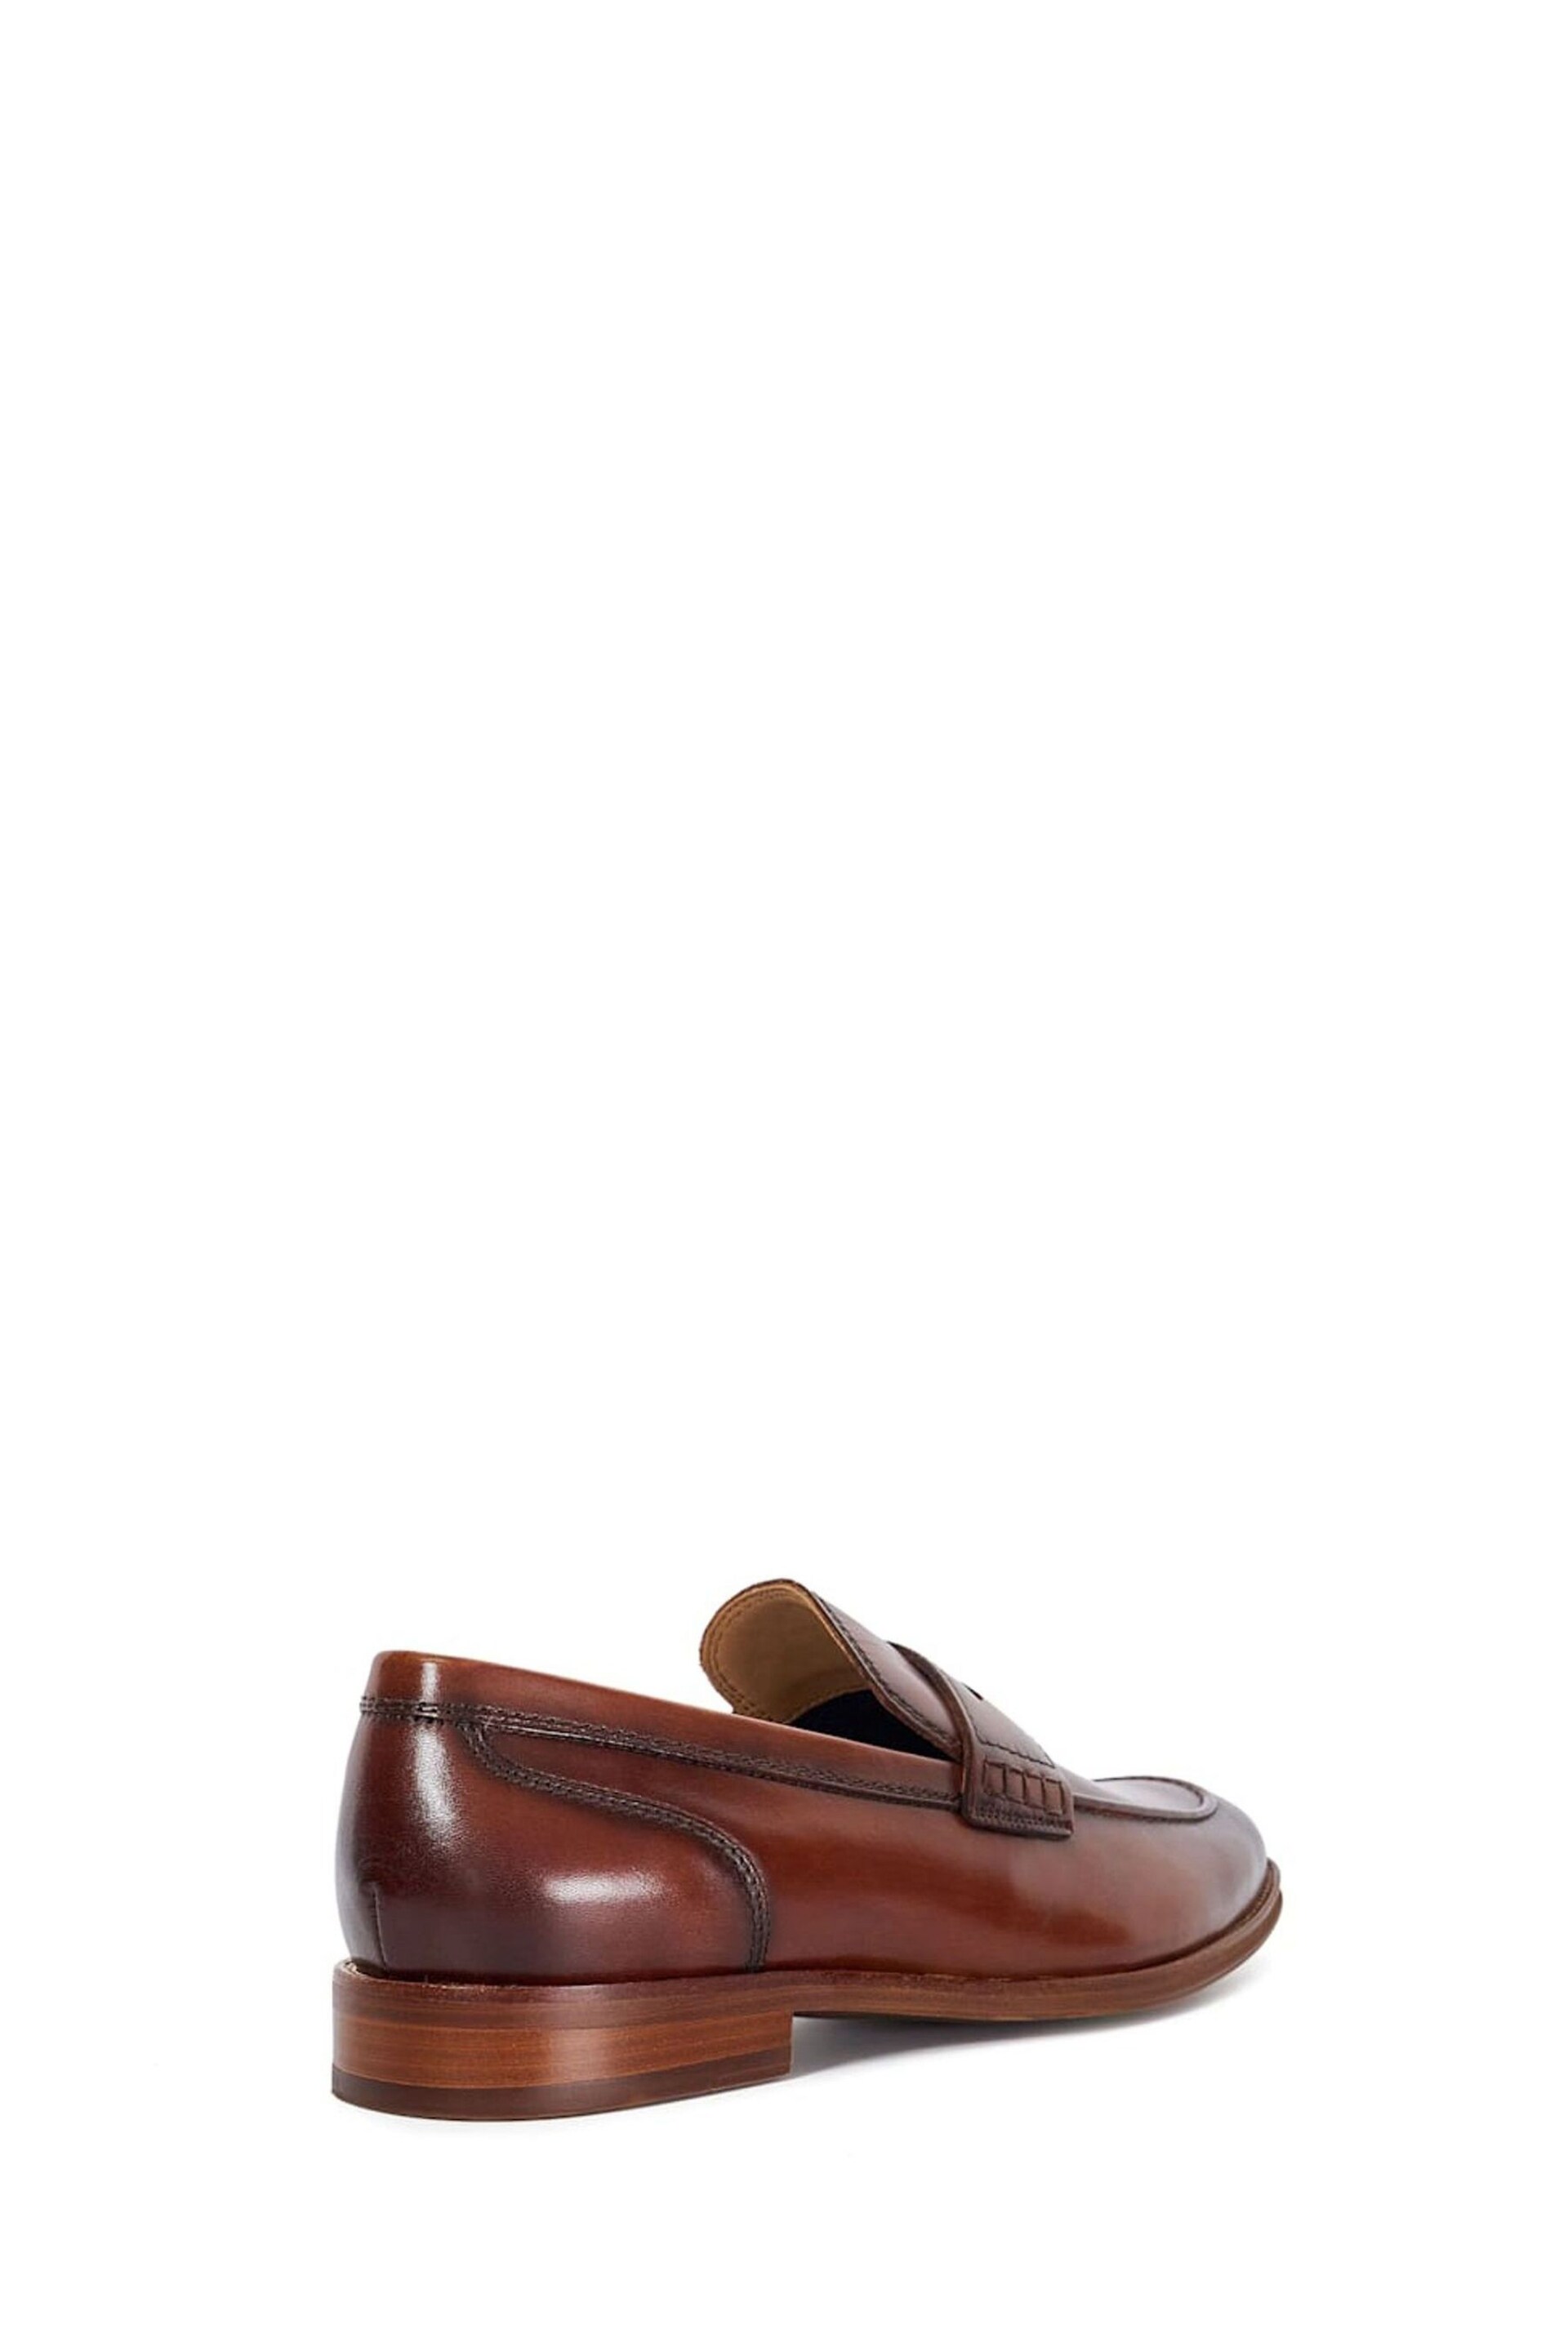 Dune London Brown Wide Fit Sulli Sole Penny Loafers - Image 3 of 6